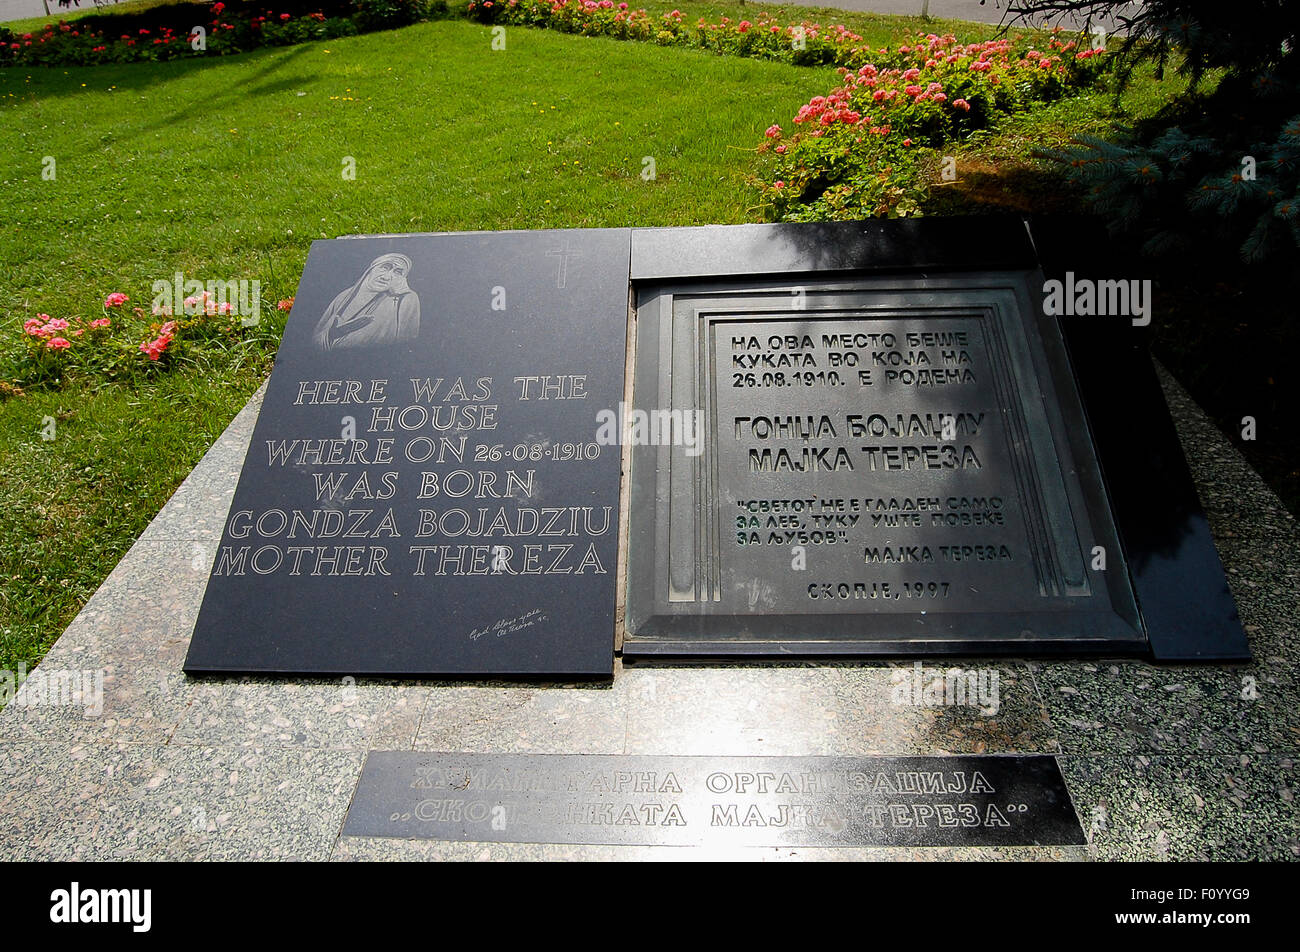 Plaque of the birth house of Mother Teresa - Skopje - Macedonia Stock Photo